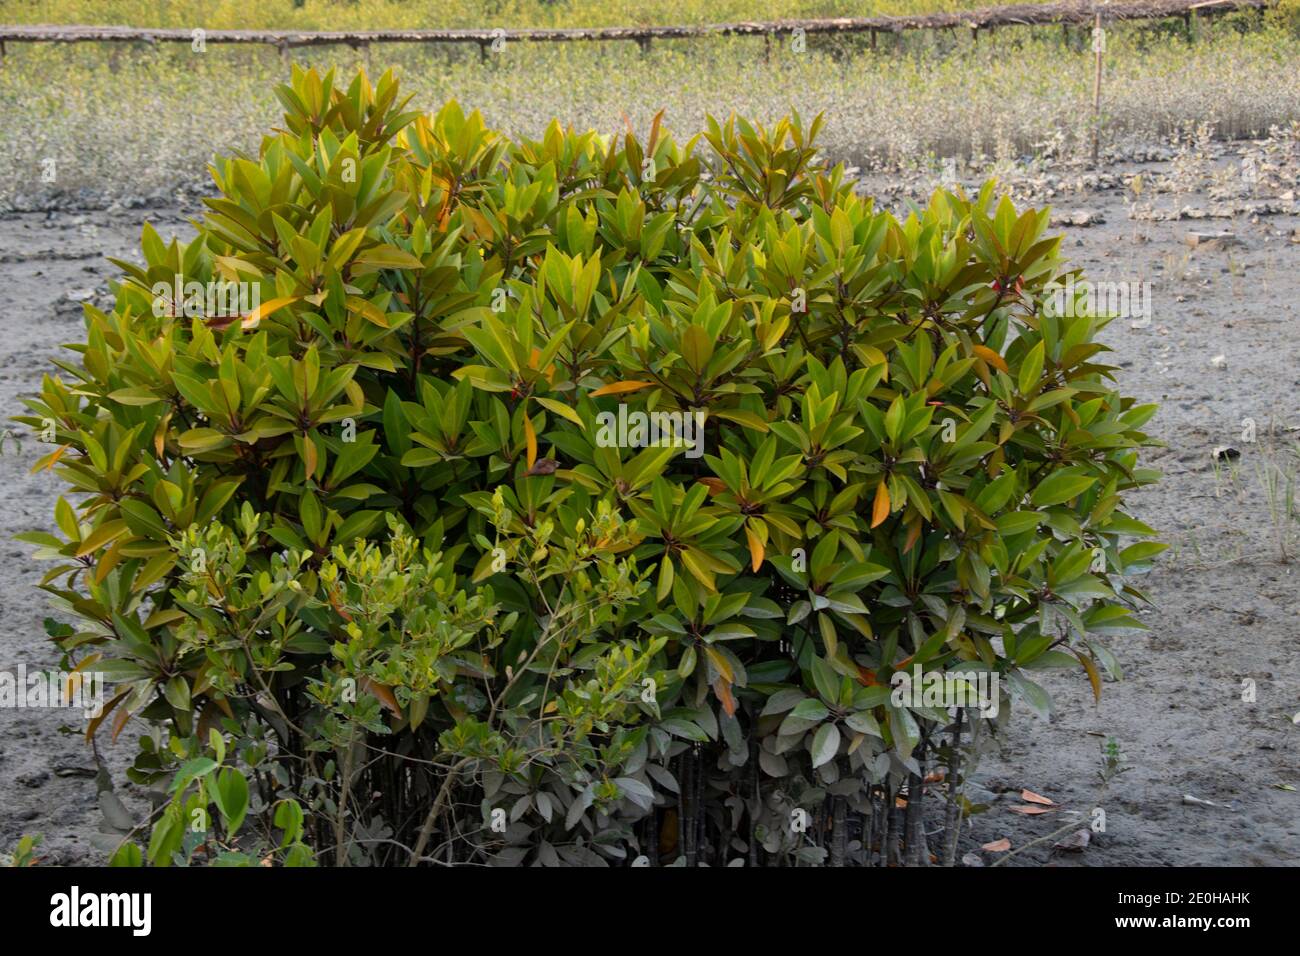 Bruguiera is a plant genus in the family Rhizophoraceae. It is a small genus of five mangrove species and three hybrids of the Indian and west Pacific Stock Photo